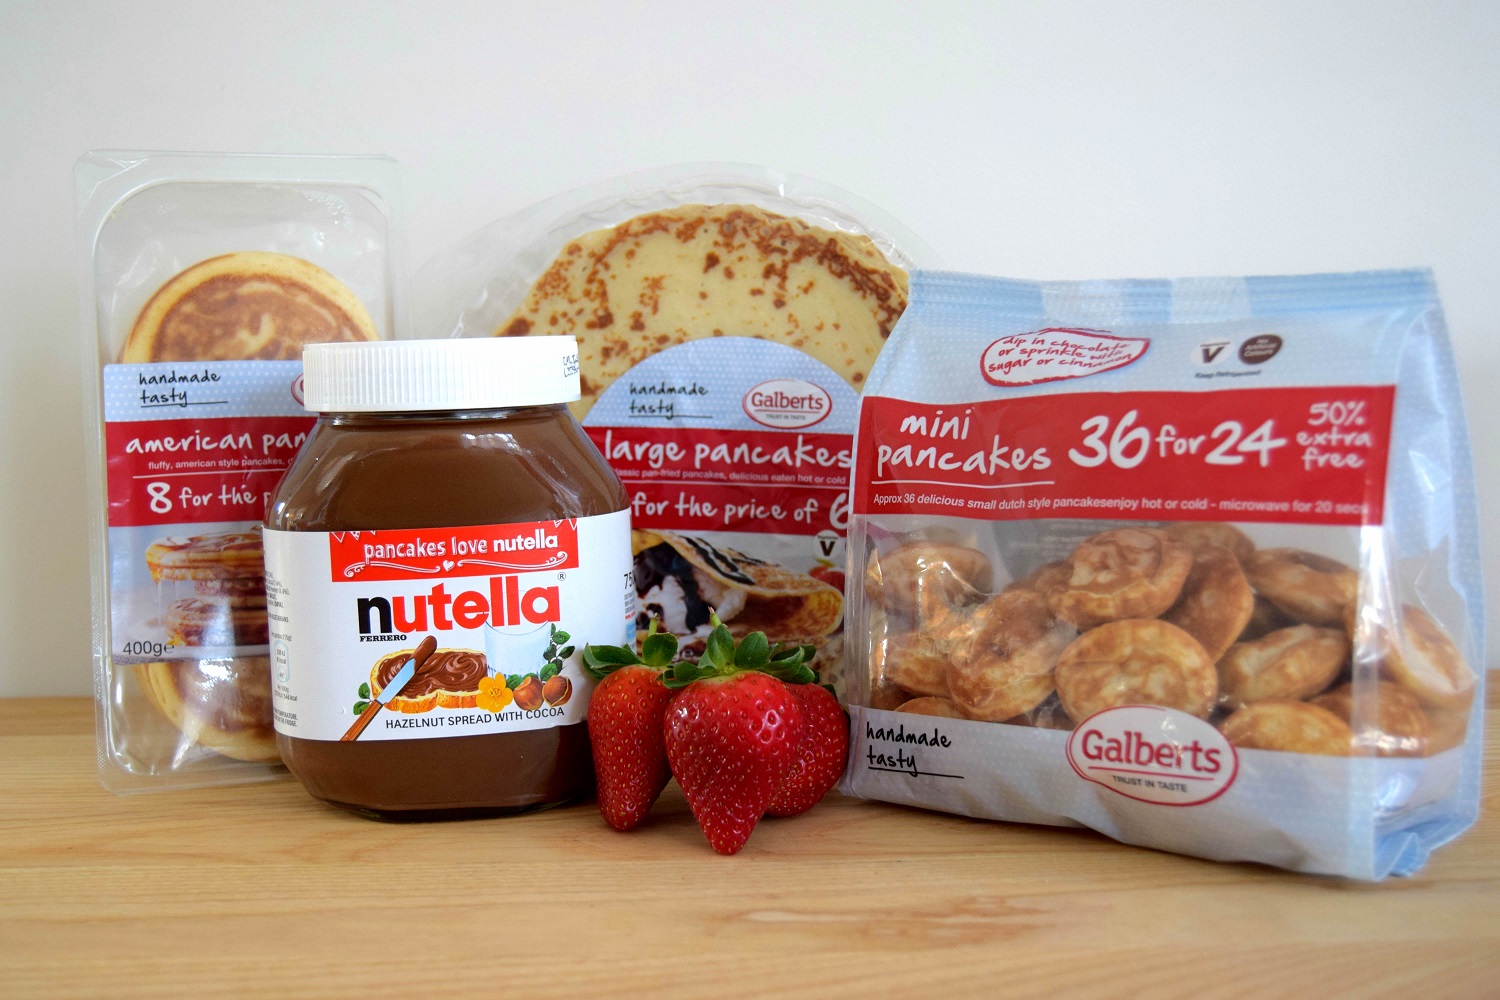 Galberts to partner with Nutella on Pancake Day Campaign